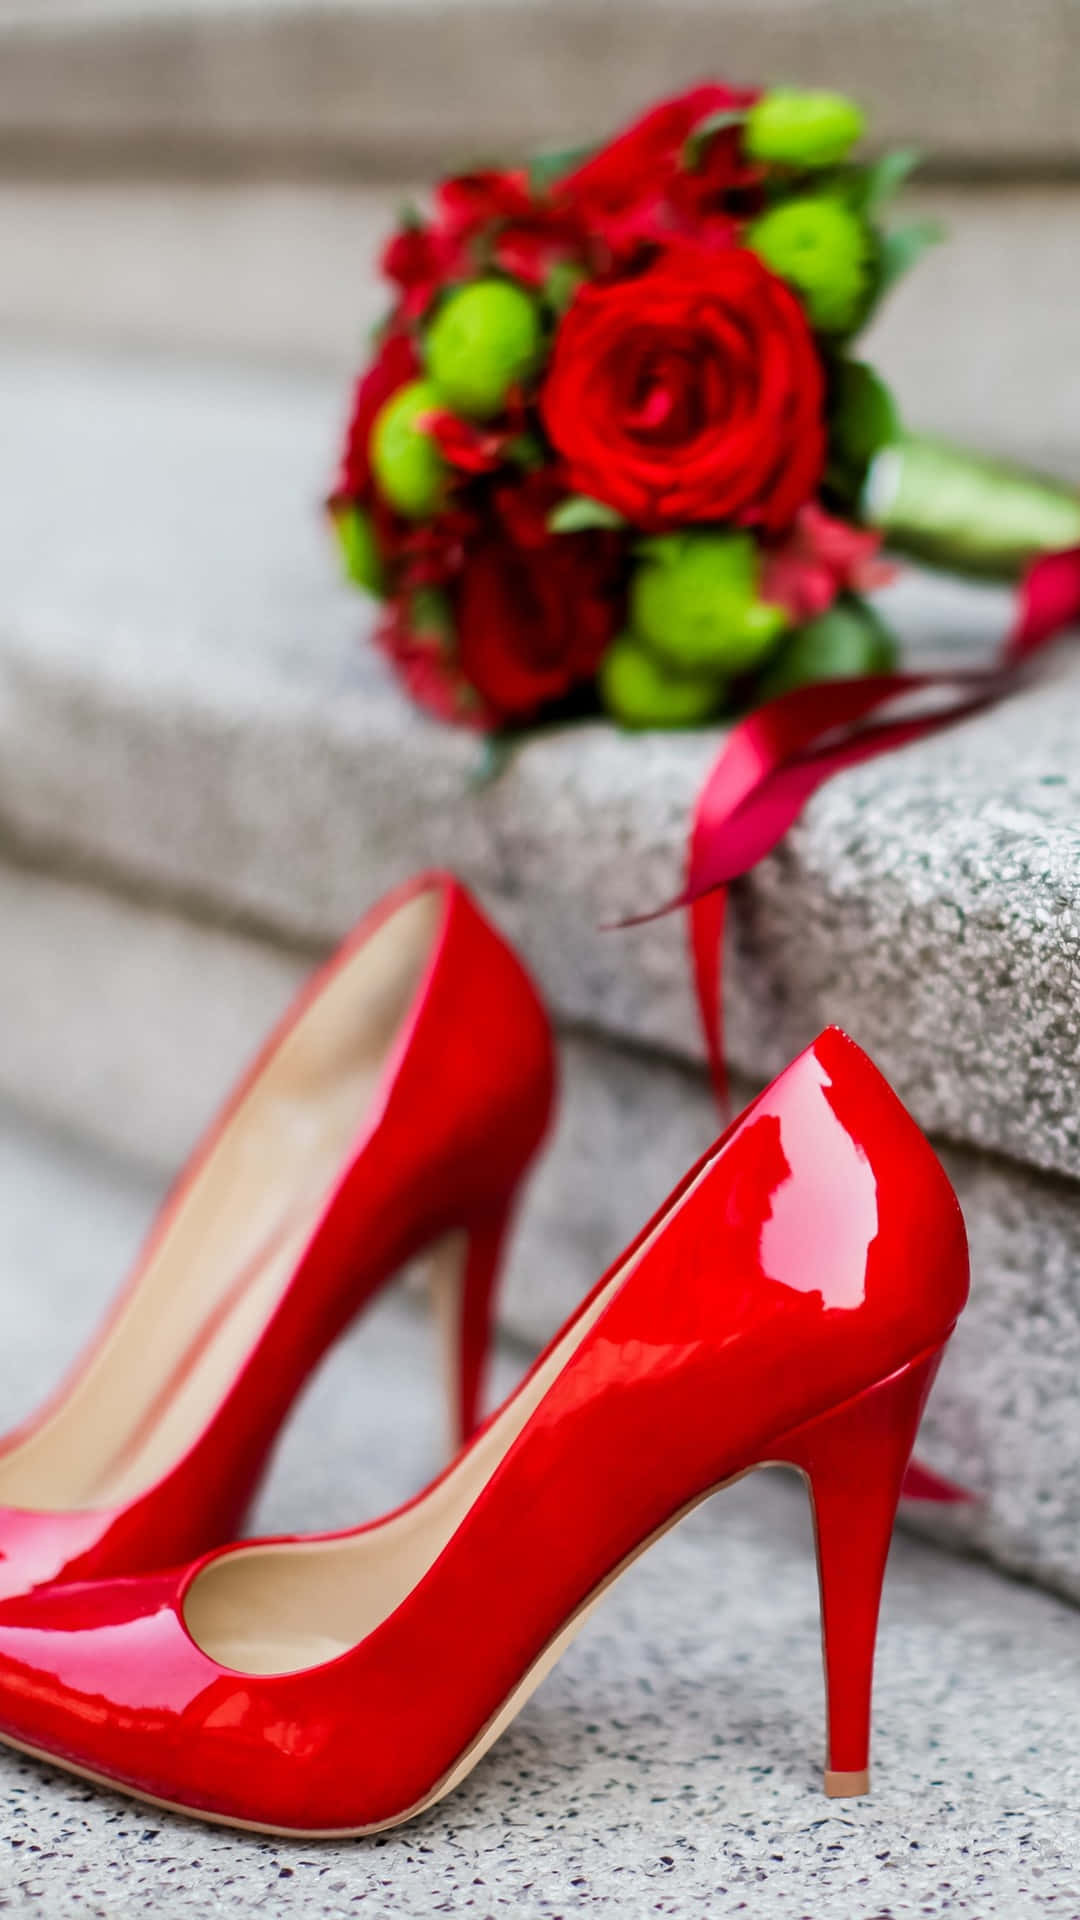 Elegant Red High Heels on a Reflective Surface Wallpaper